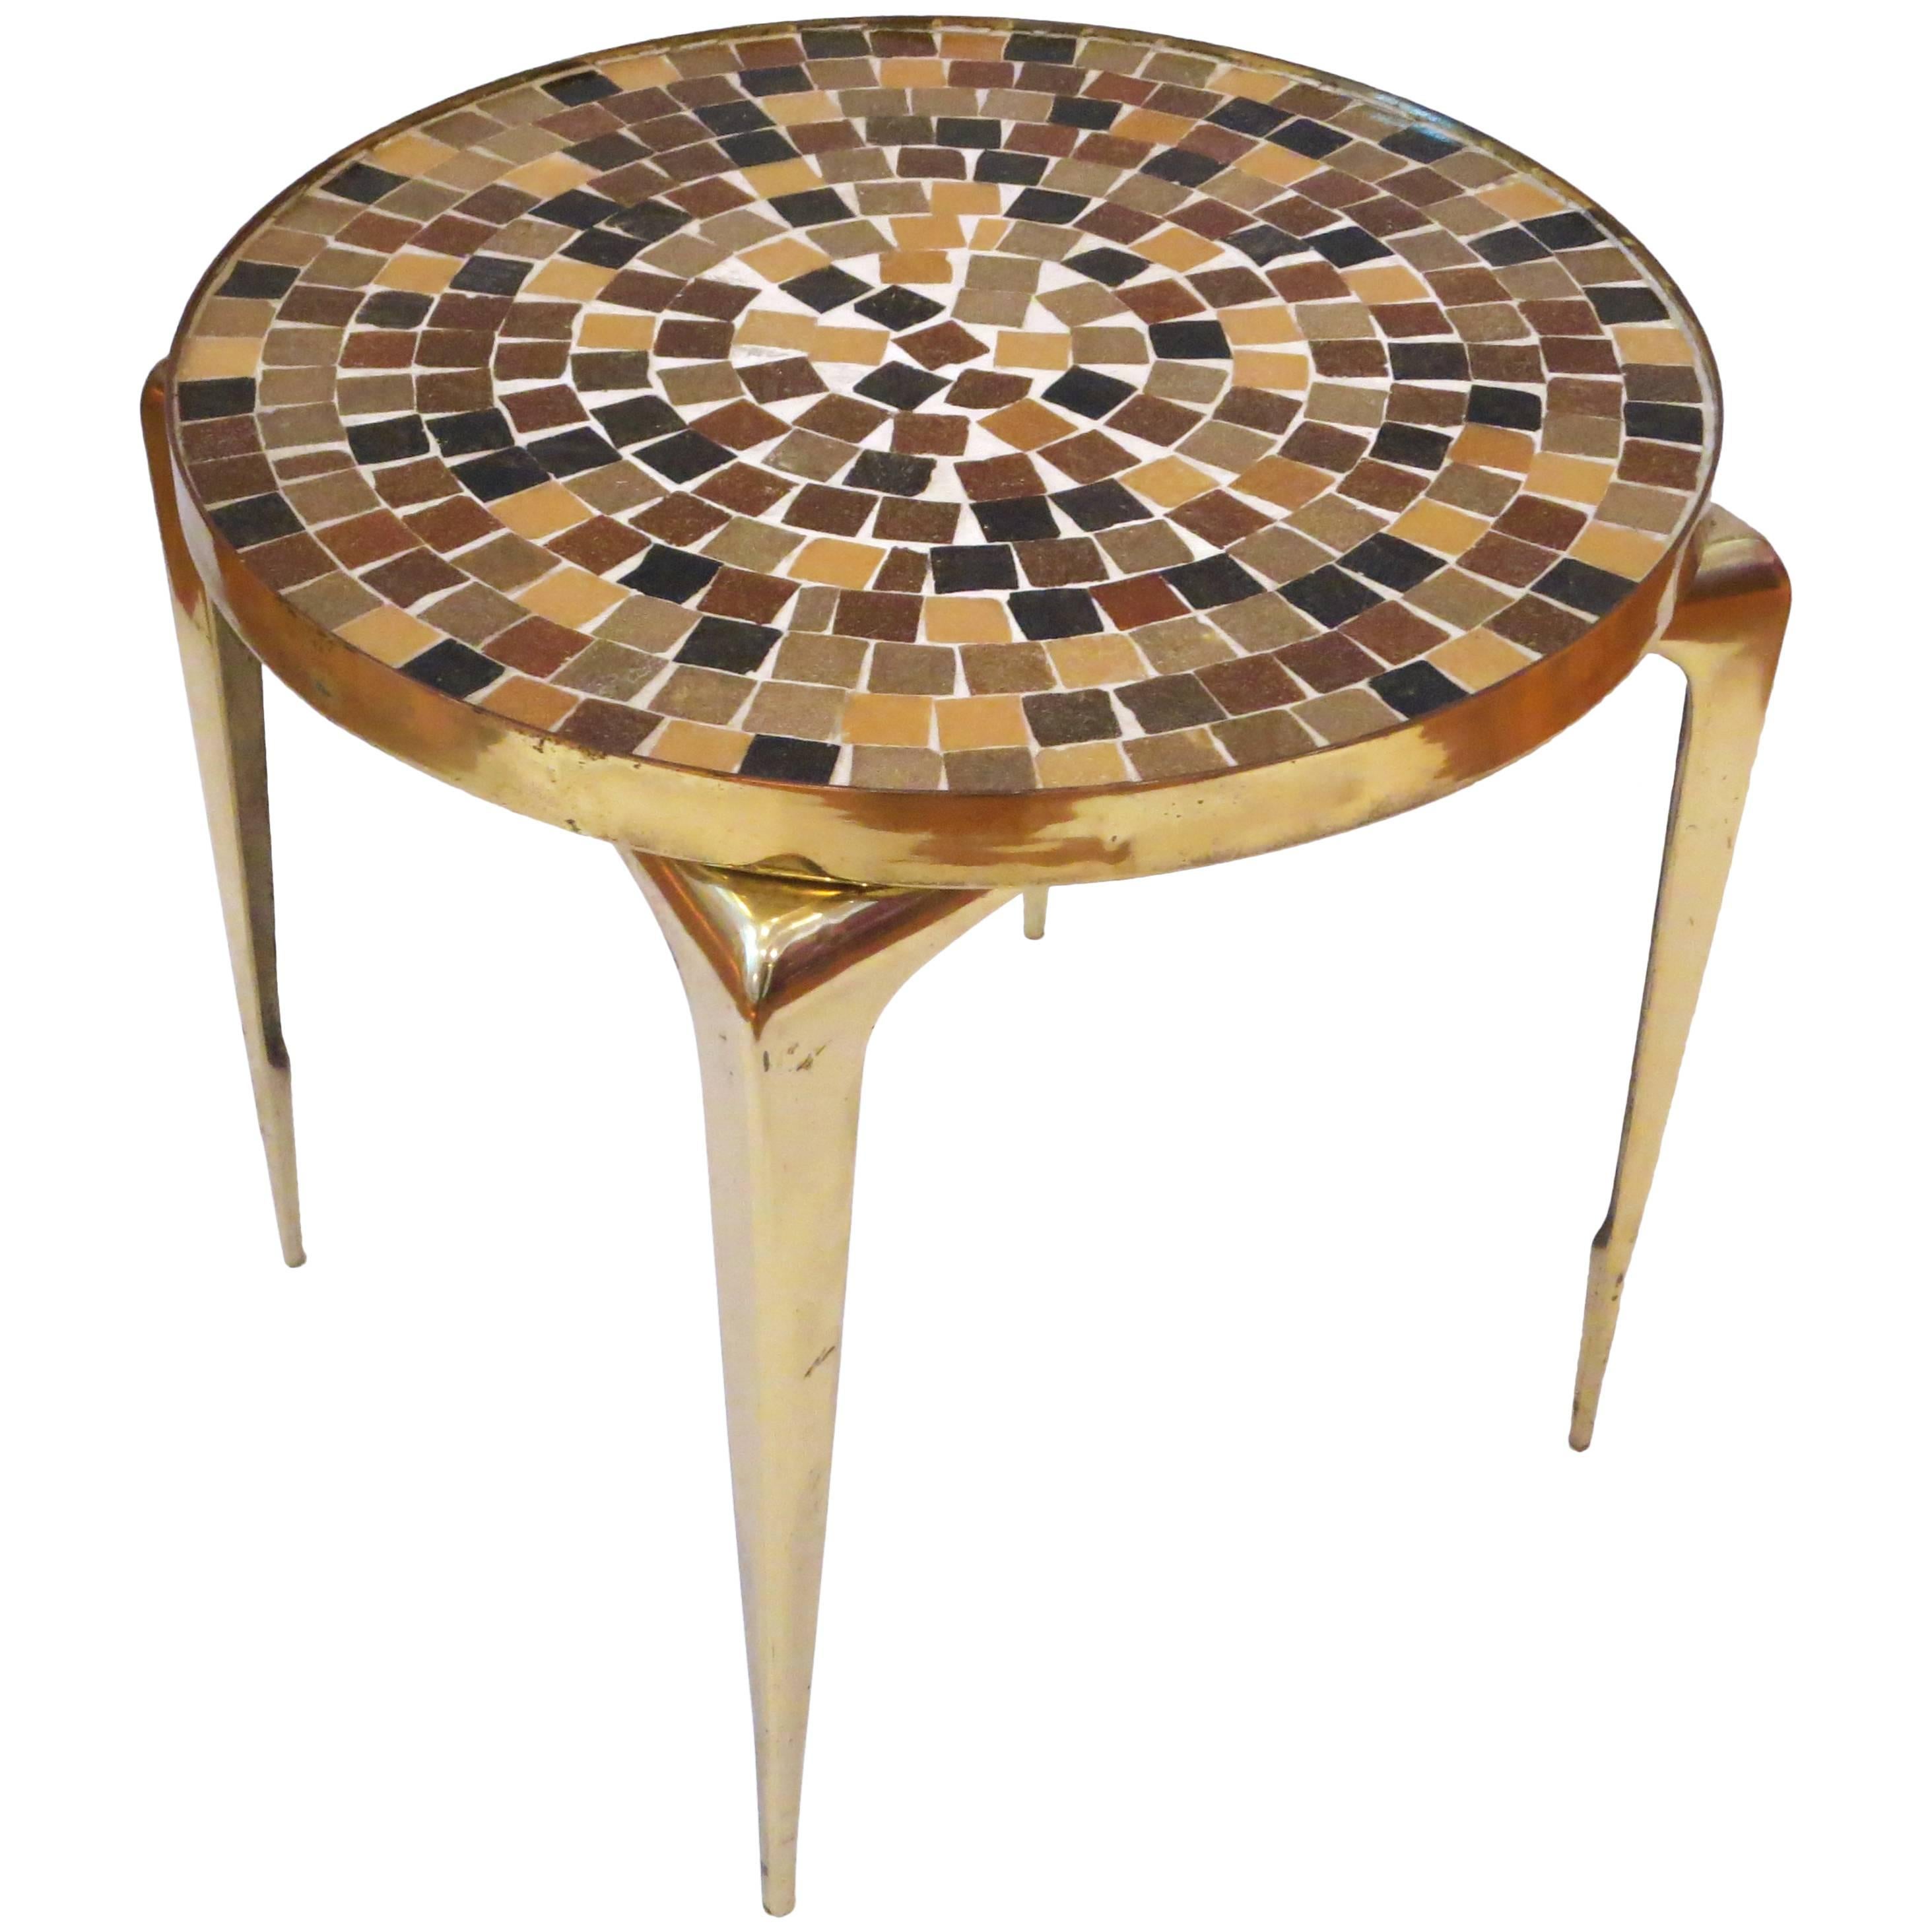 1950s Italian Mid-Century Modern Brass and Mosaic/Tile Top Small Cocktail Table